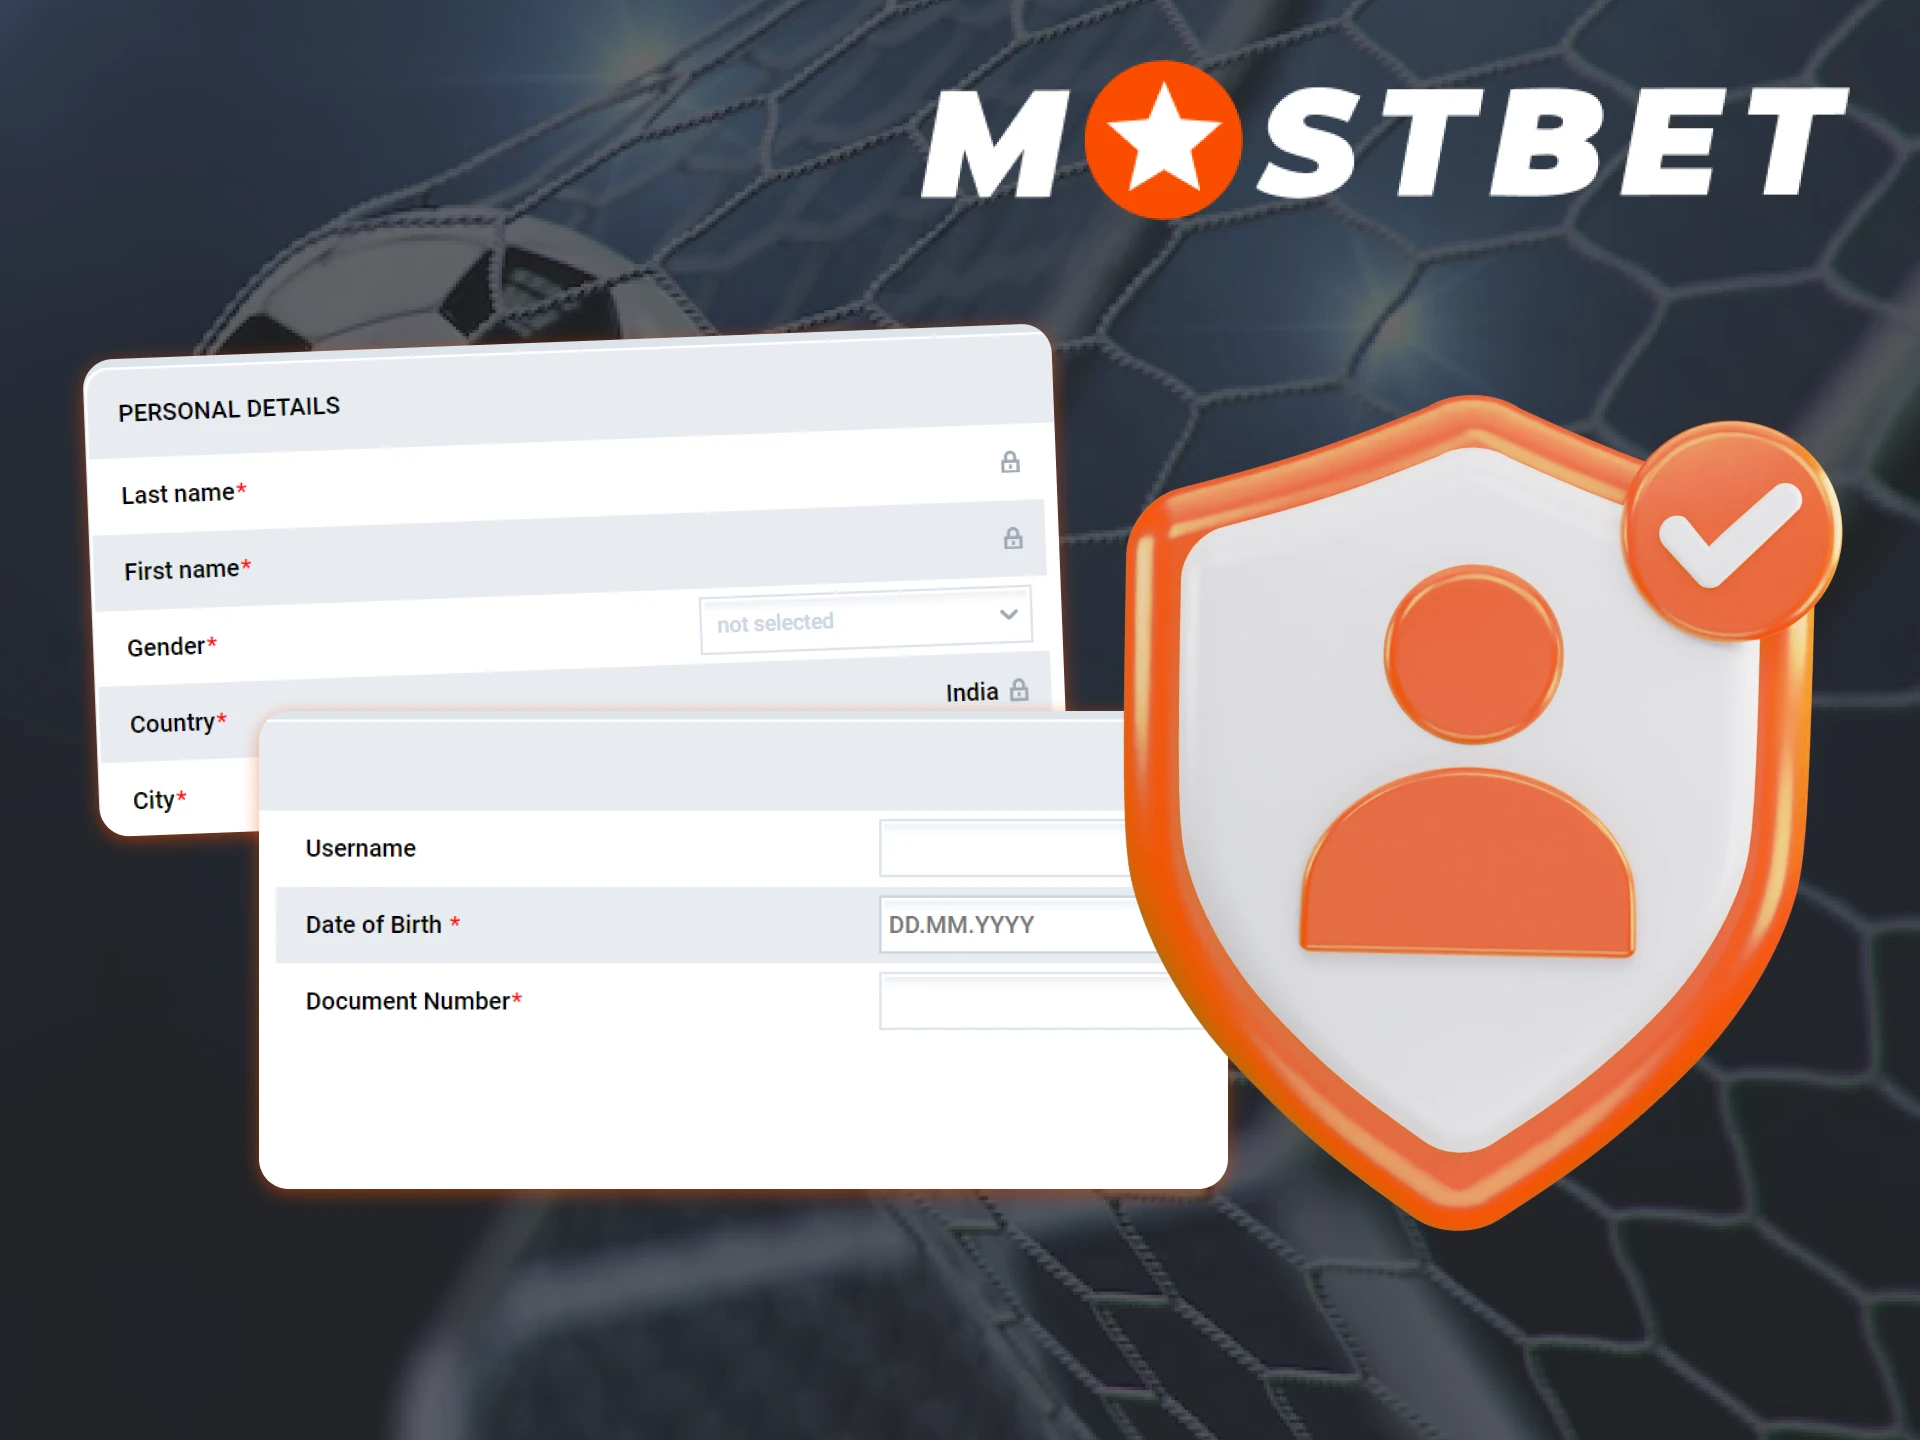 Complete Mostbet's verification process to be able to place bets and withdraw funds.